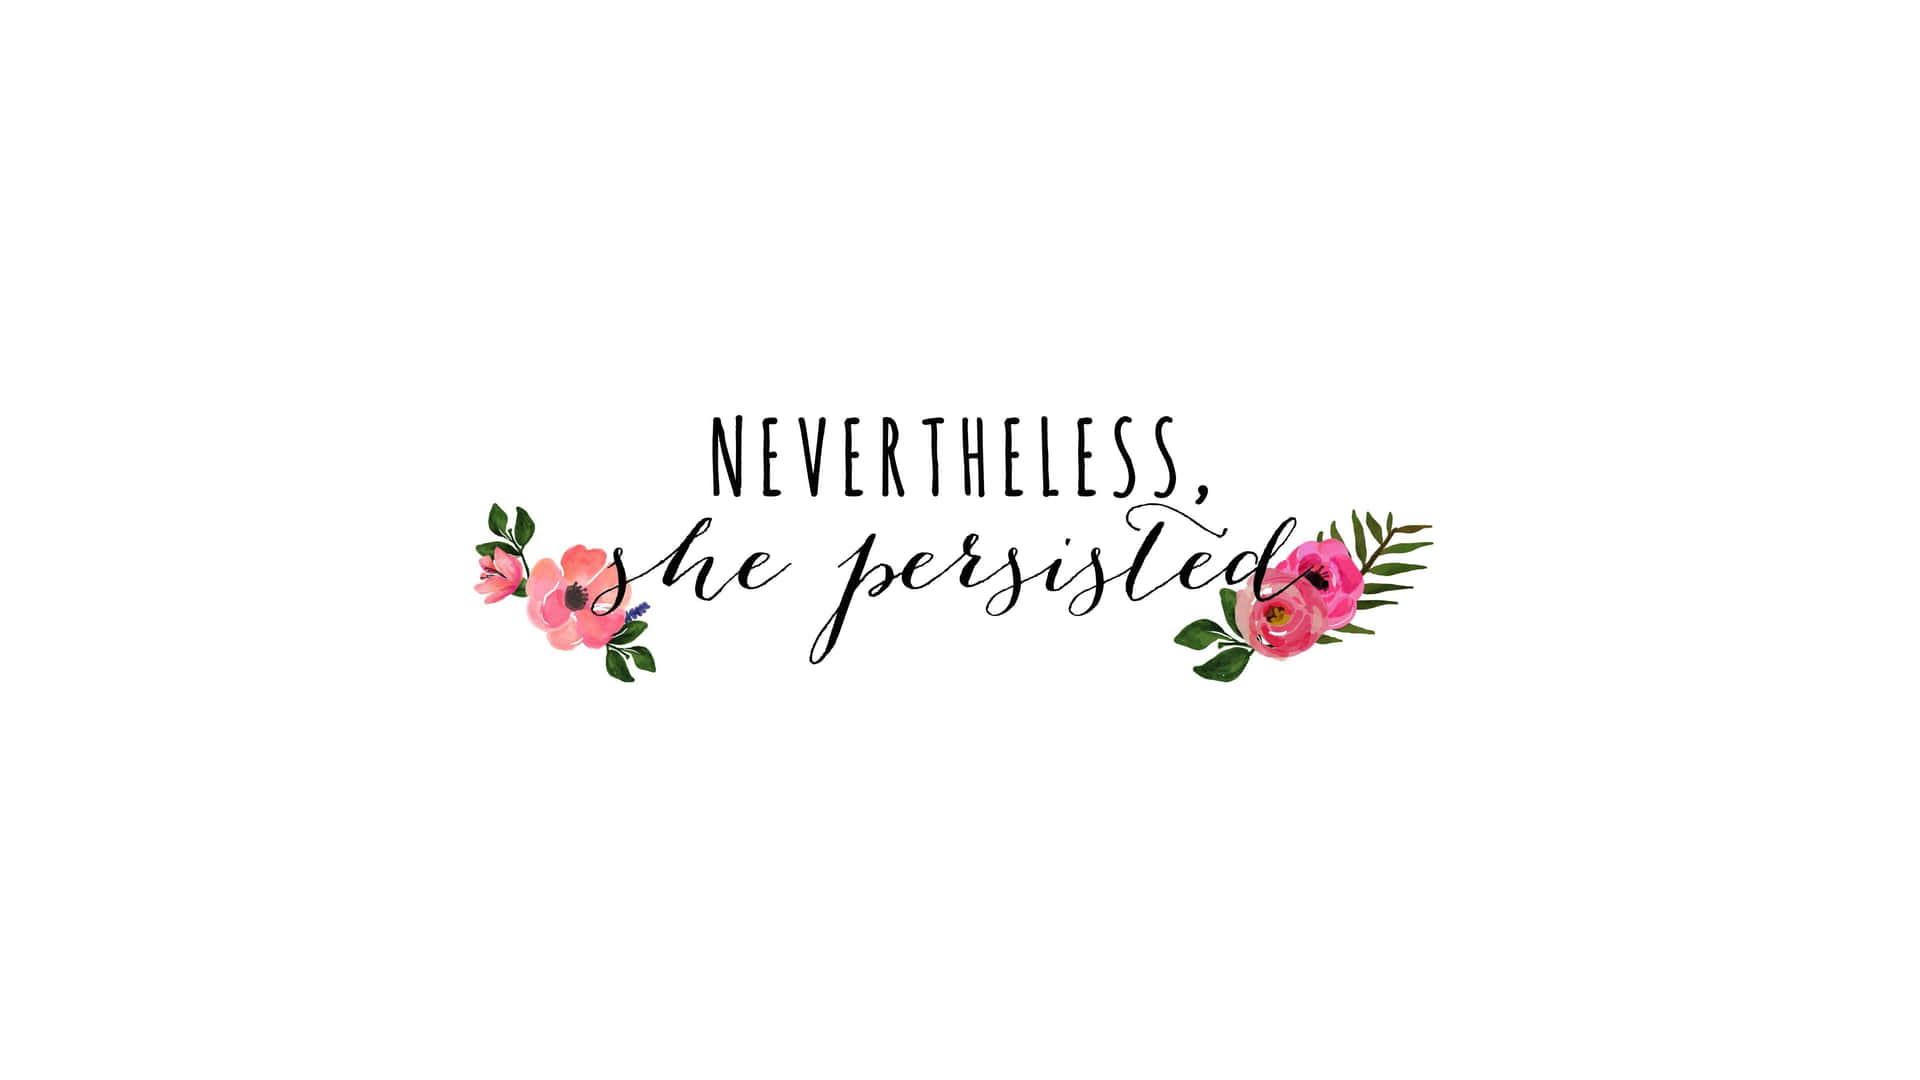 Nevertheless She Persisted_ Inspirational Quote Wallpaper